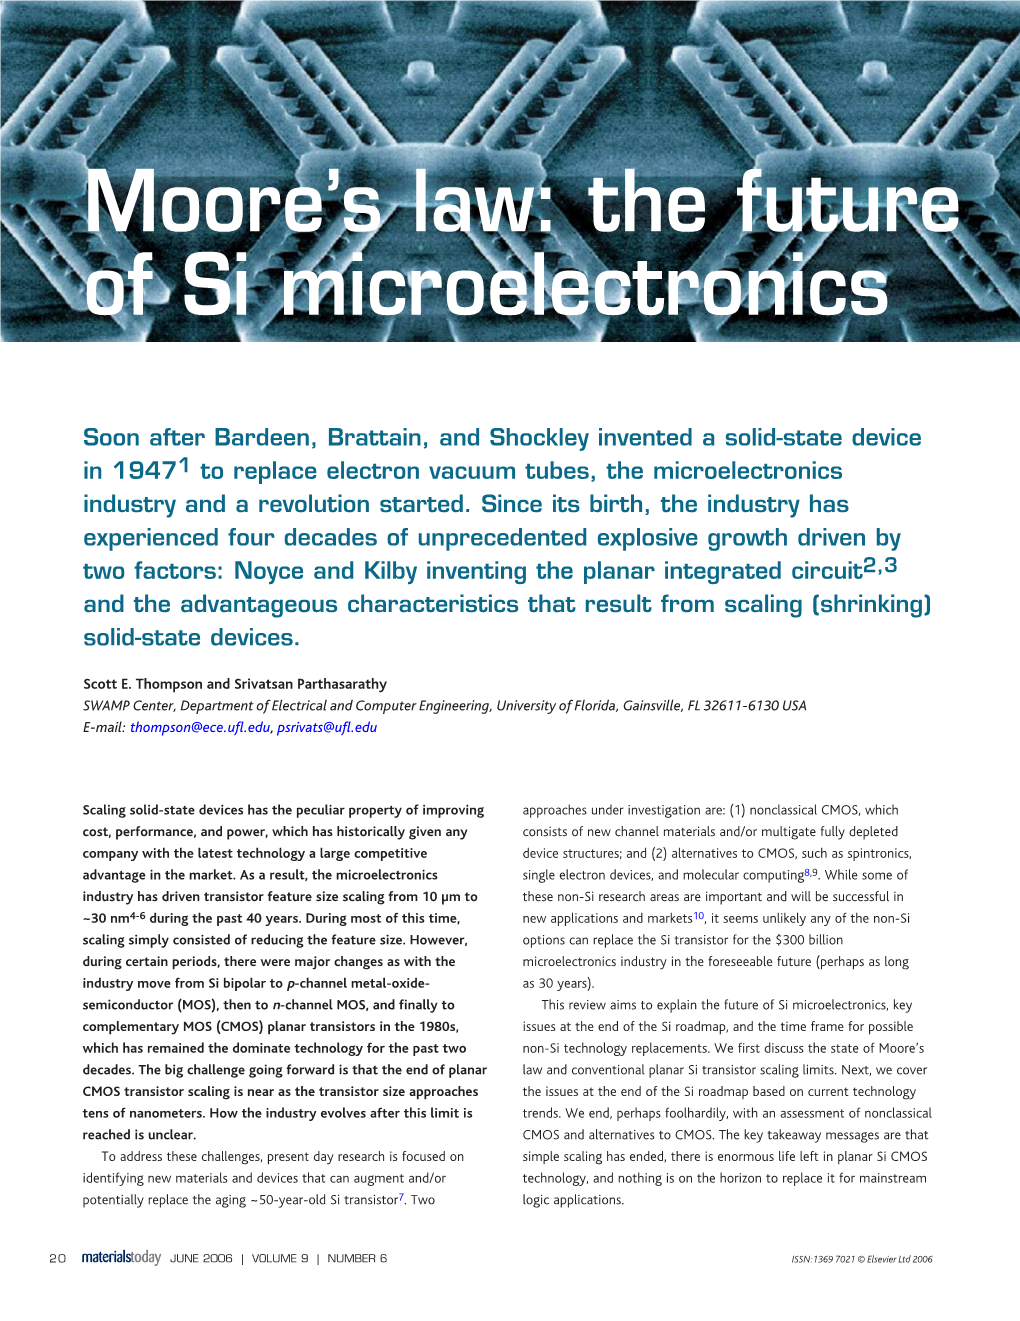 Moore's Law: the Future of Si Microelectronics